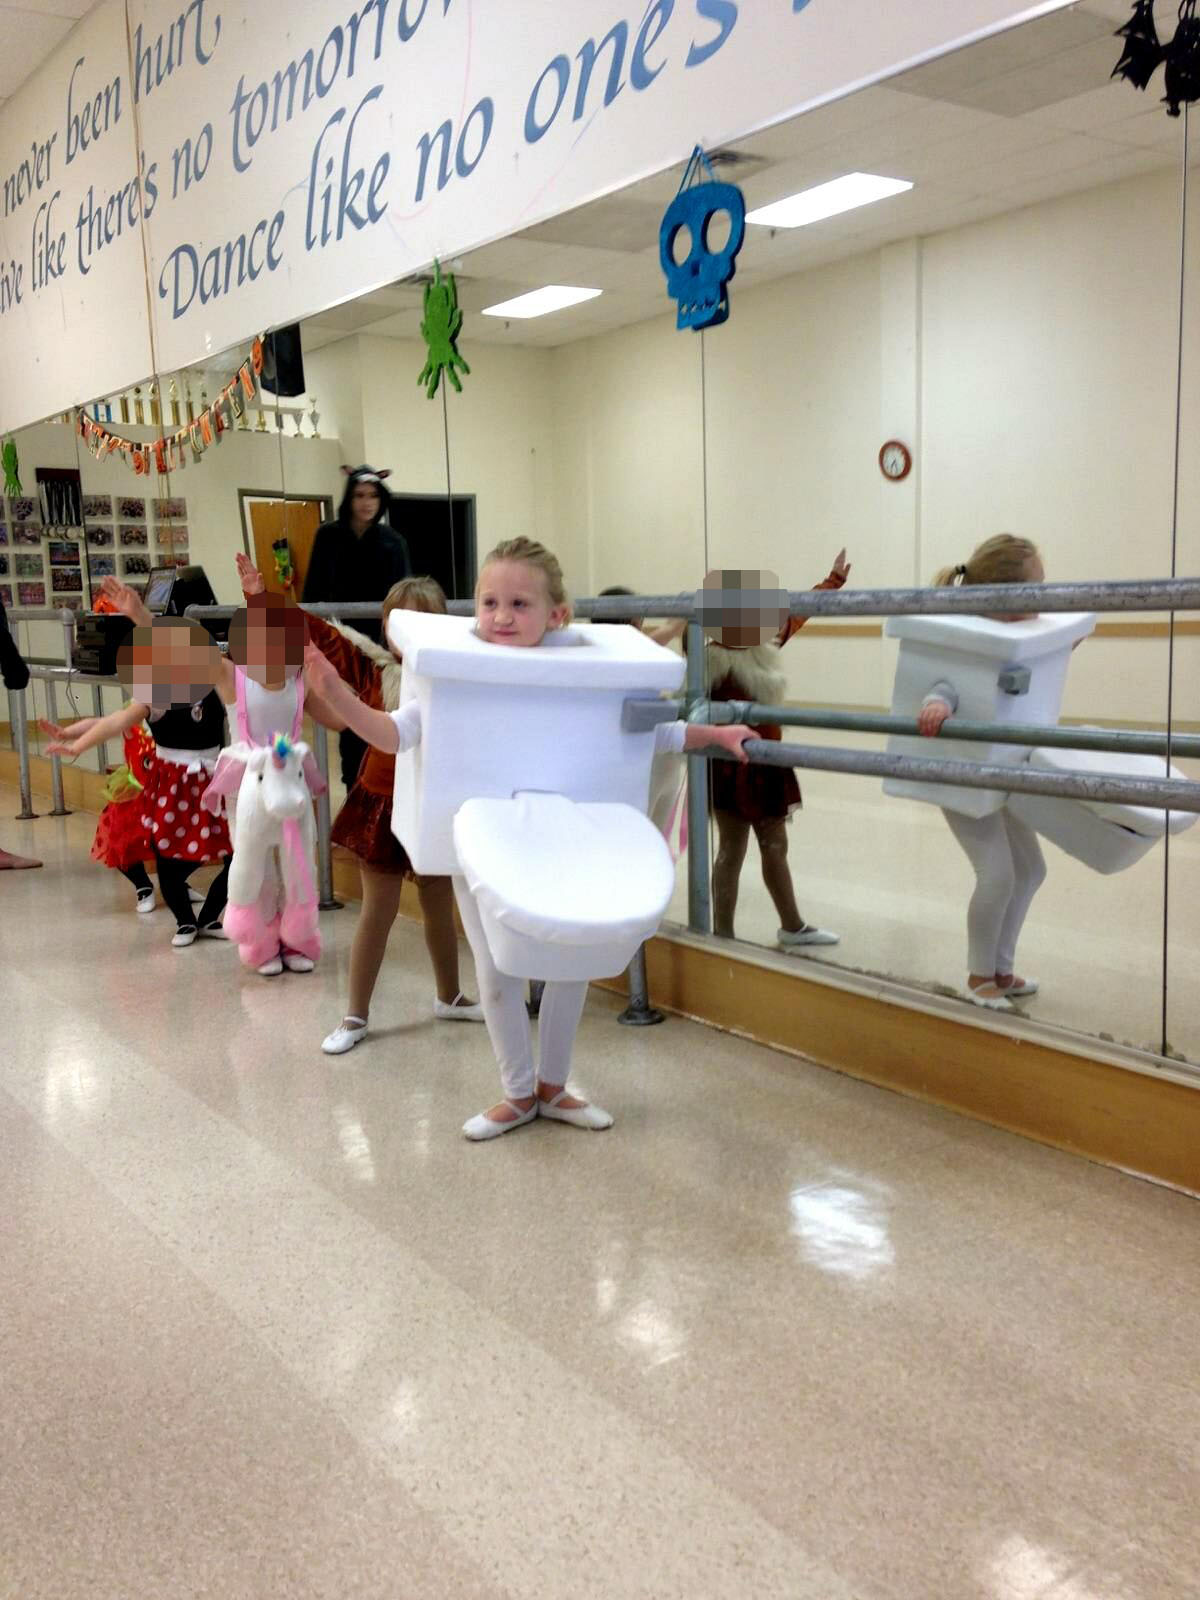 Little Girl Wins 'Game of Thrones' With Homemade Toilet Costume - ABC News